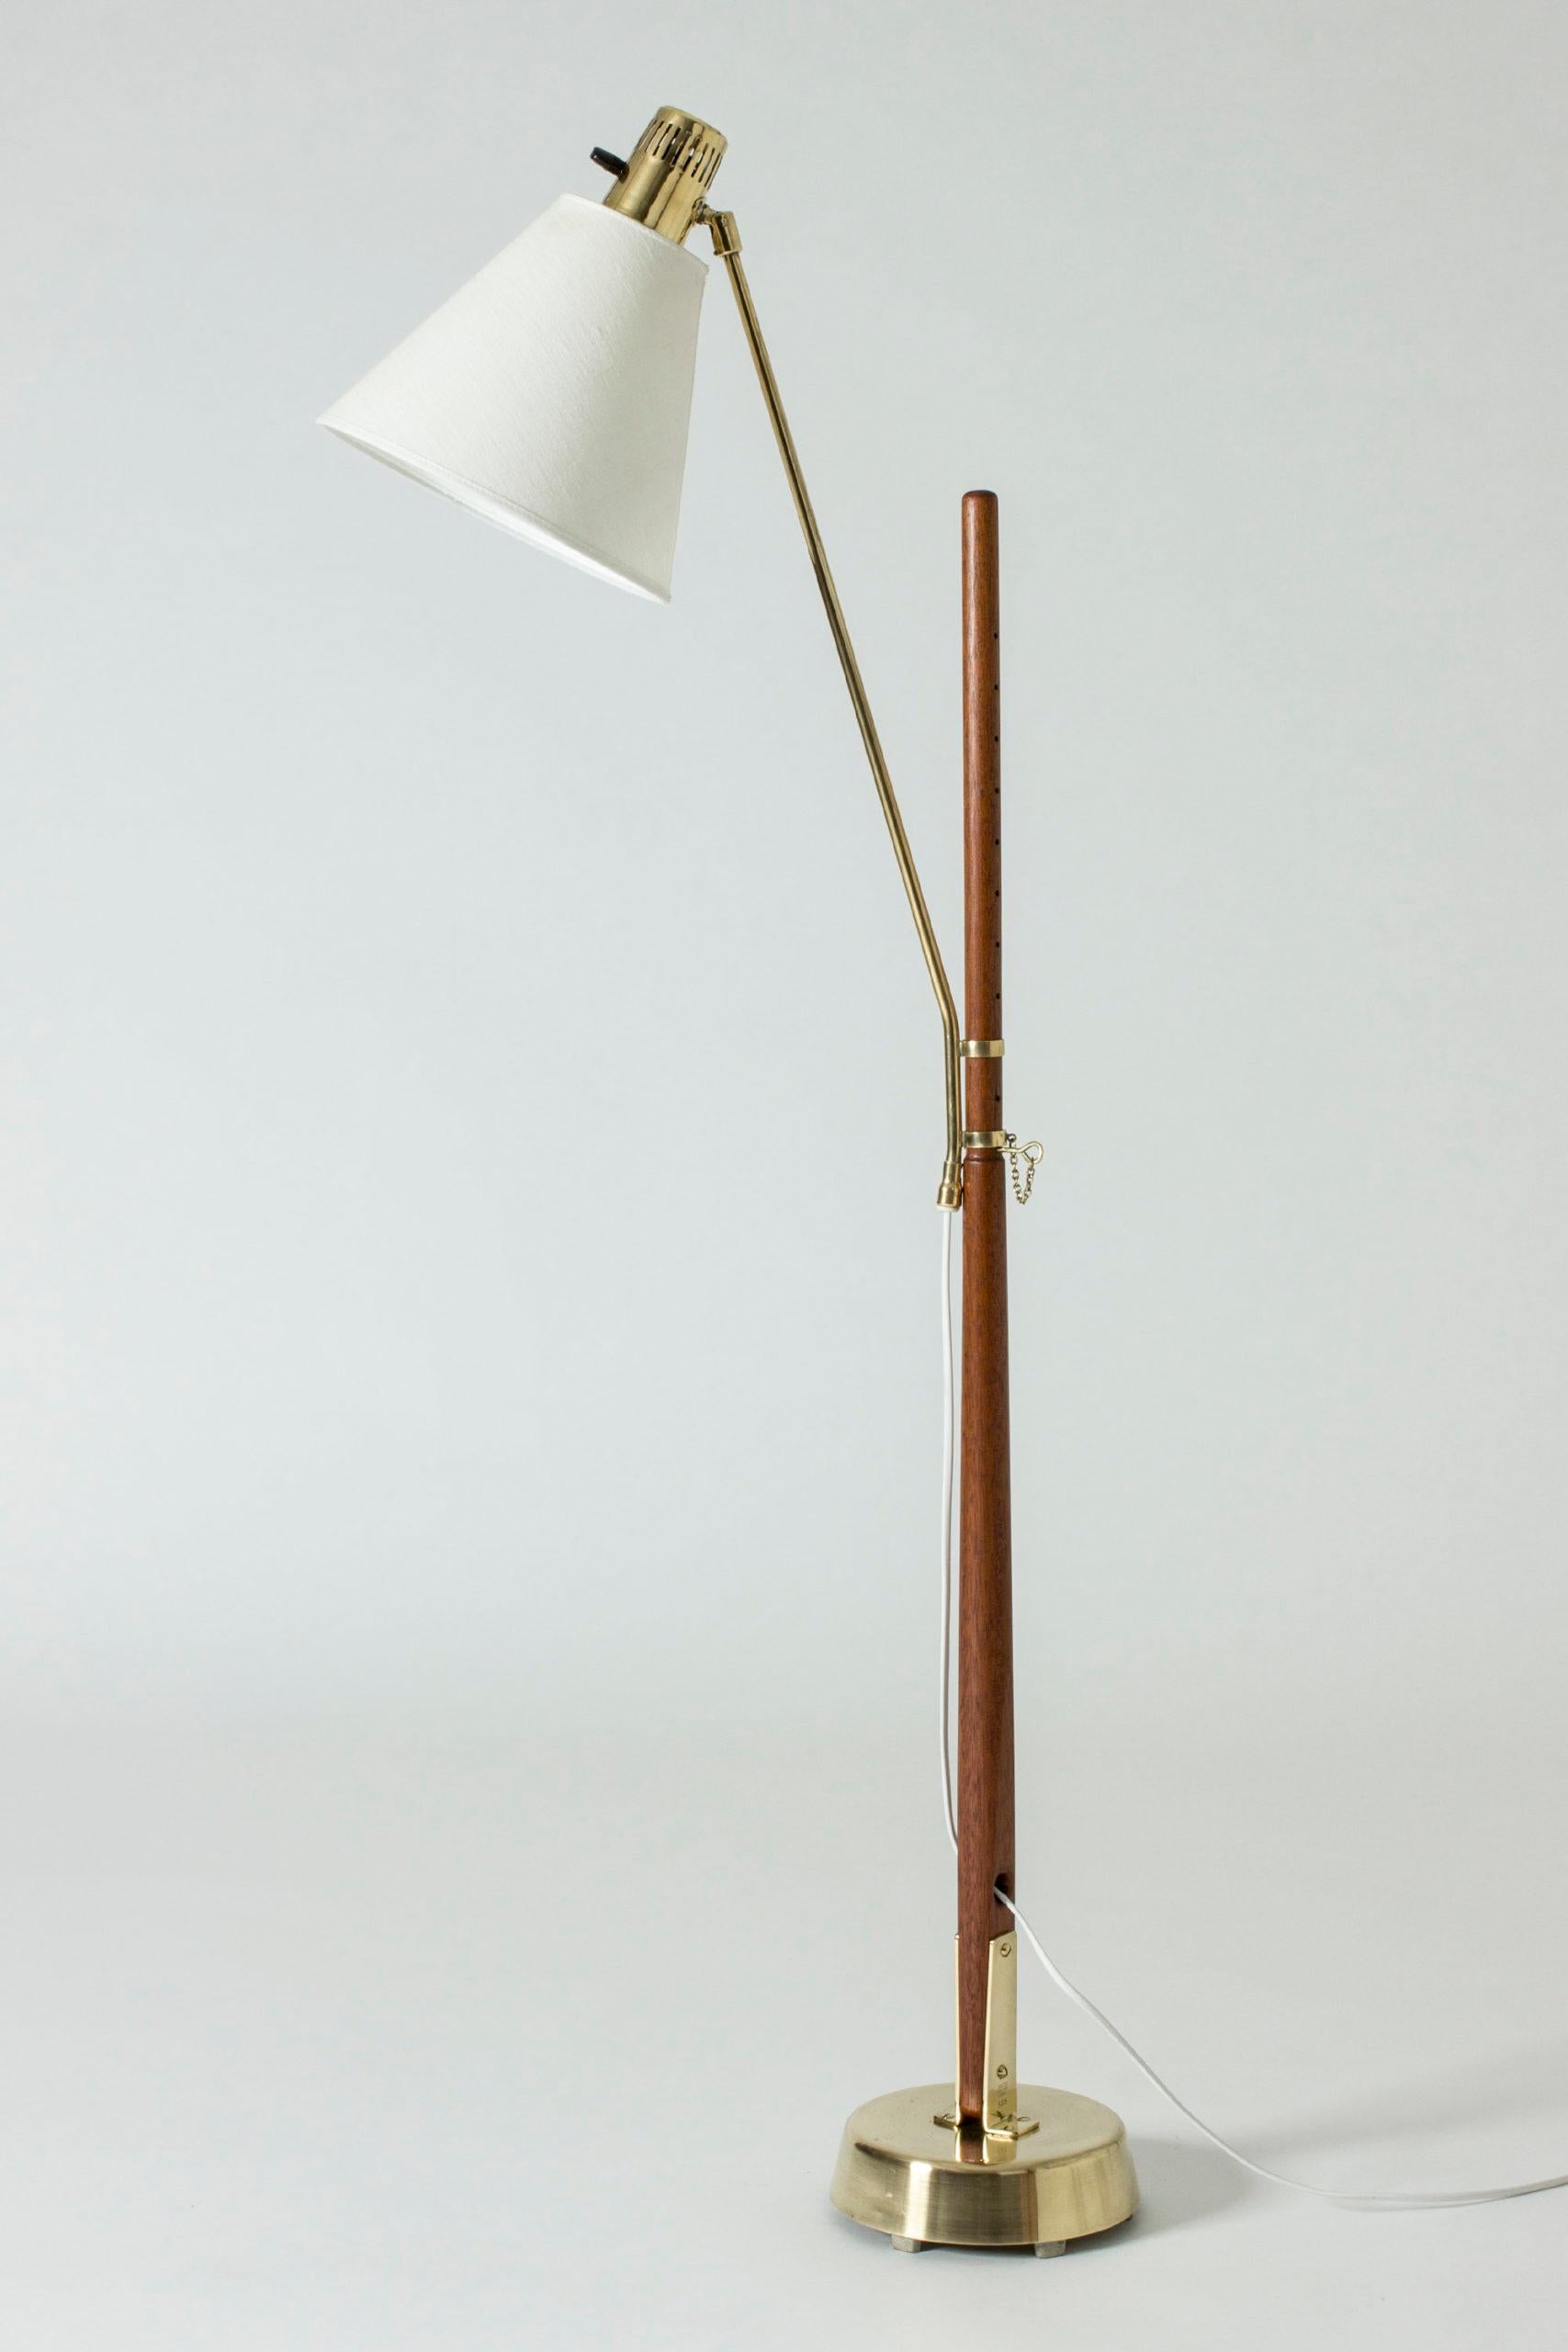 Cool floor lamp by Hans Bergström, made from brass and teak. Adjustable height, elegantly set with a brass key that is attached with a decorative chain.

Size: Height 123-153 cm, width 40 cm, depth 25 cm


About Hans Bergström: 
Hans Bergström